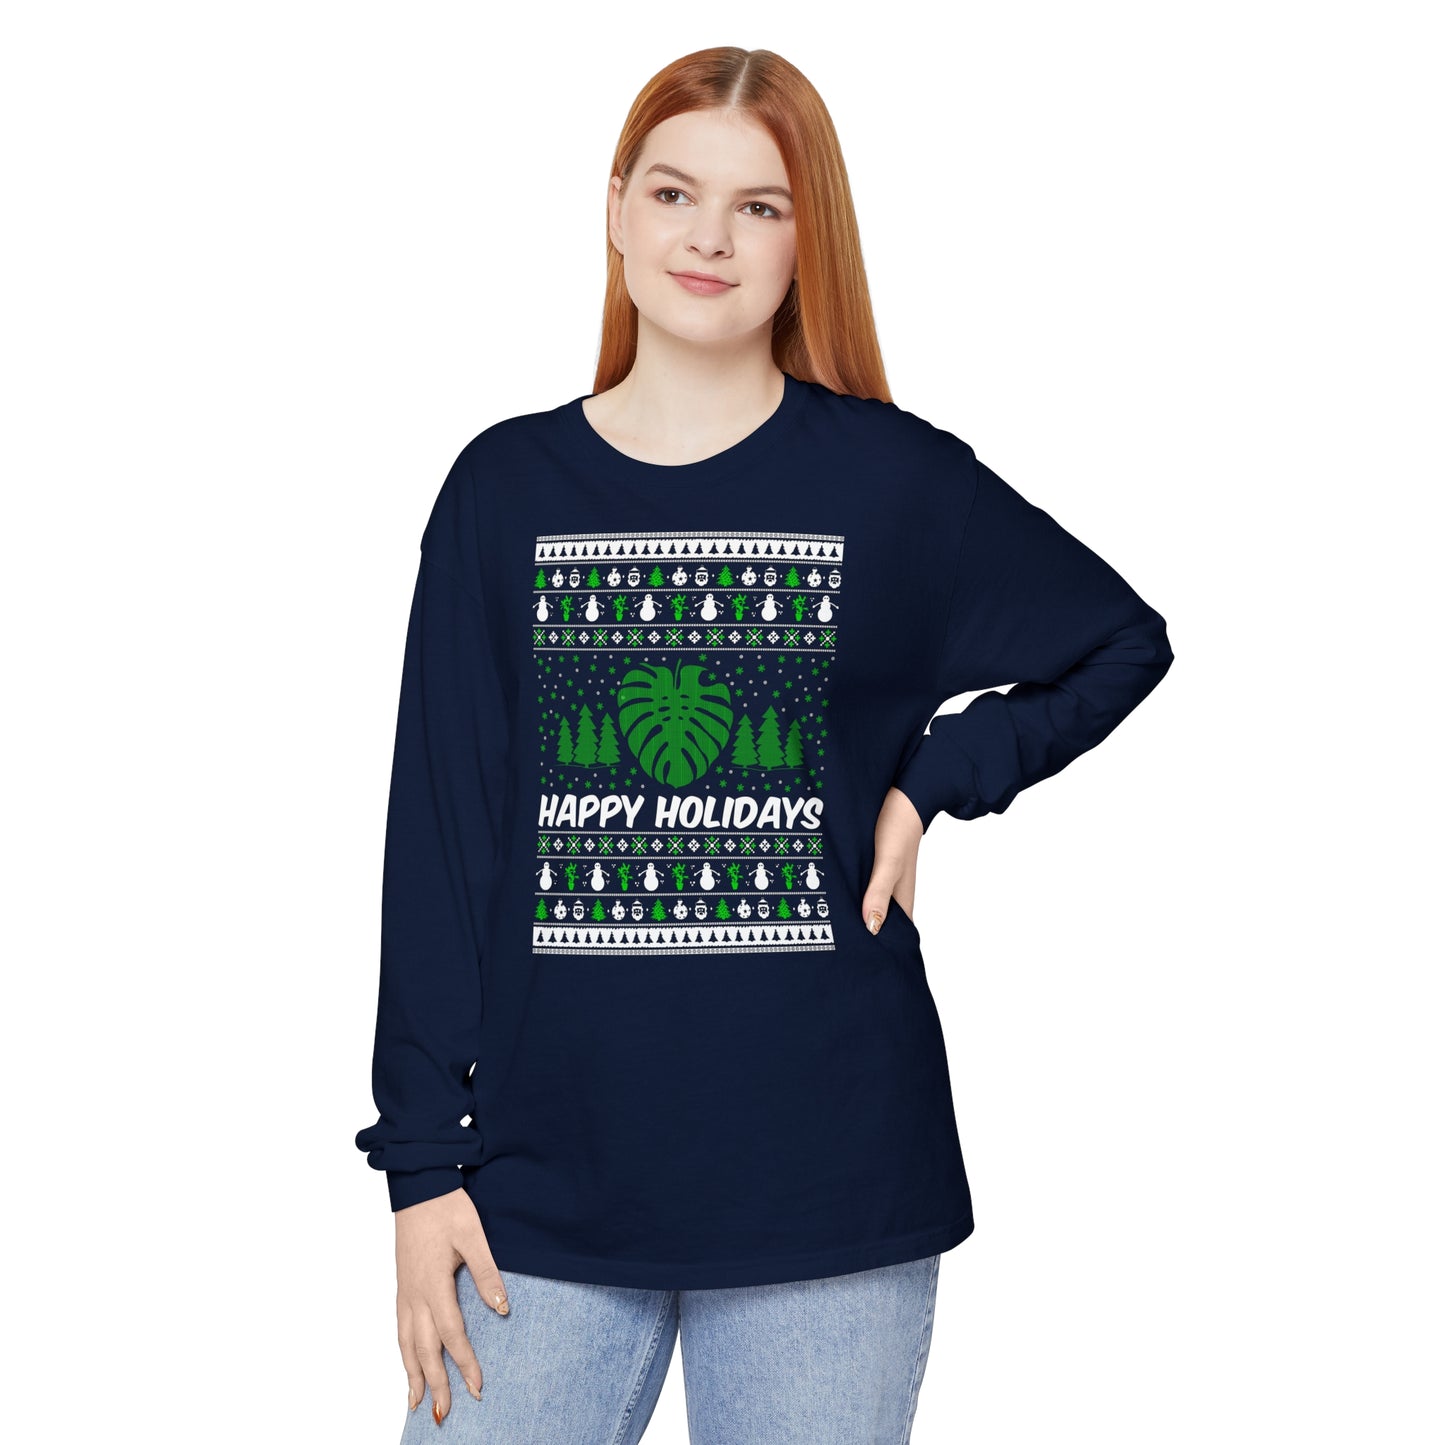 Happy holidays ugly sweater Unisex Jersey Long Sleeve Tee. Christmas ugly sweater with monstera leaf and snow flakes.